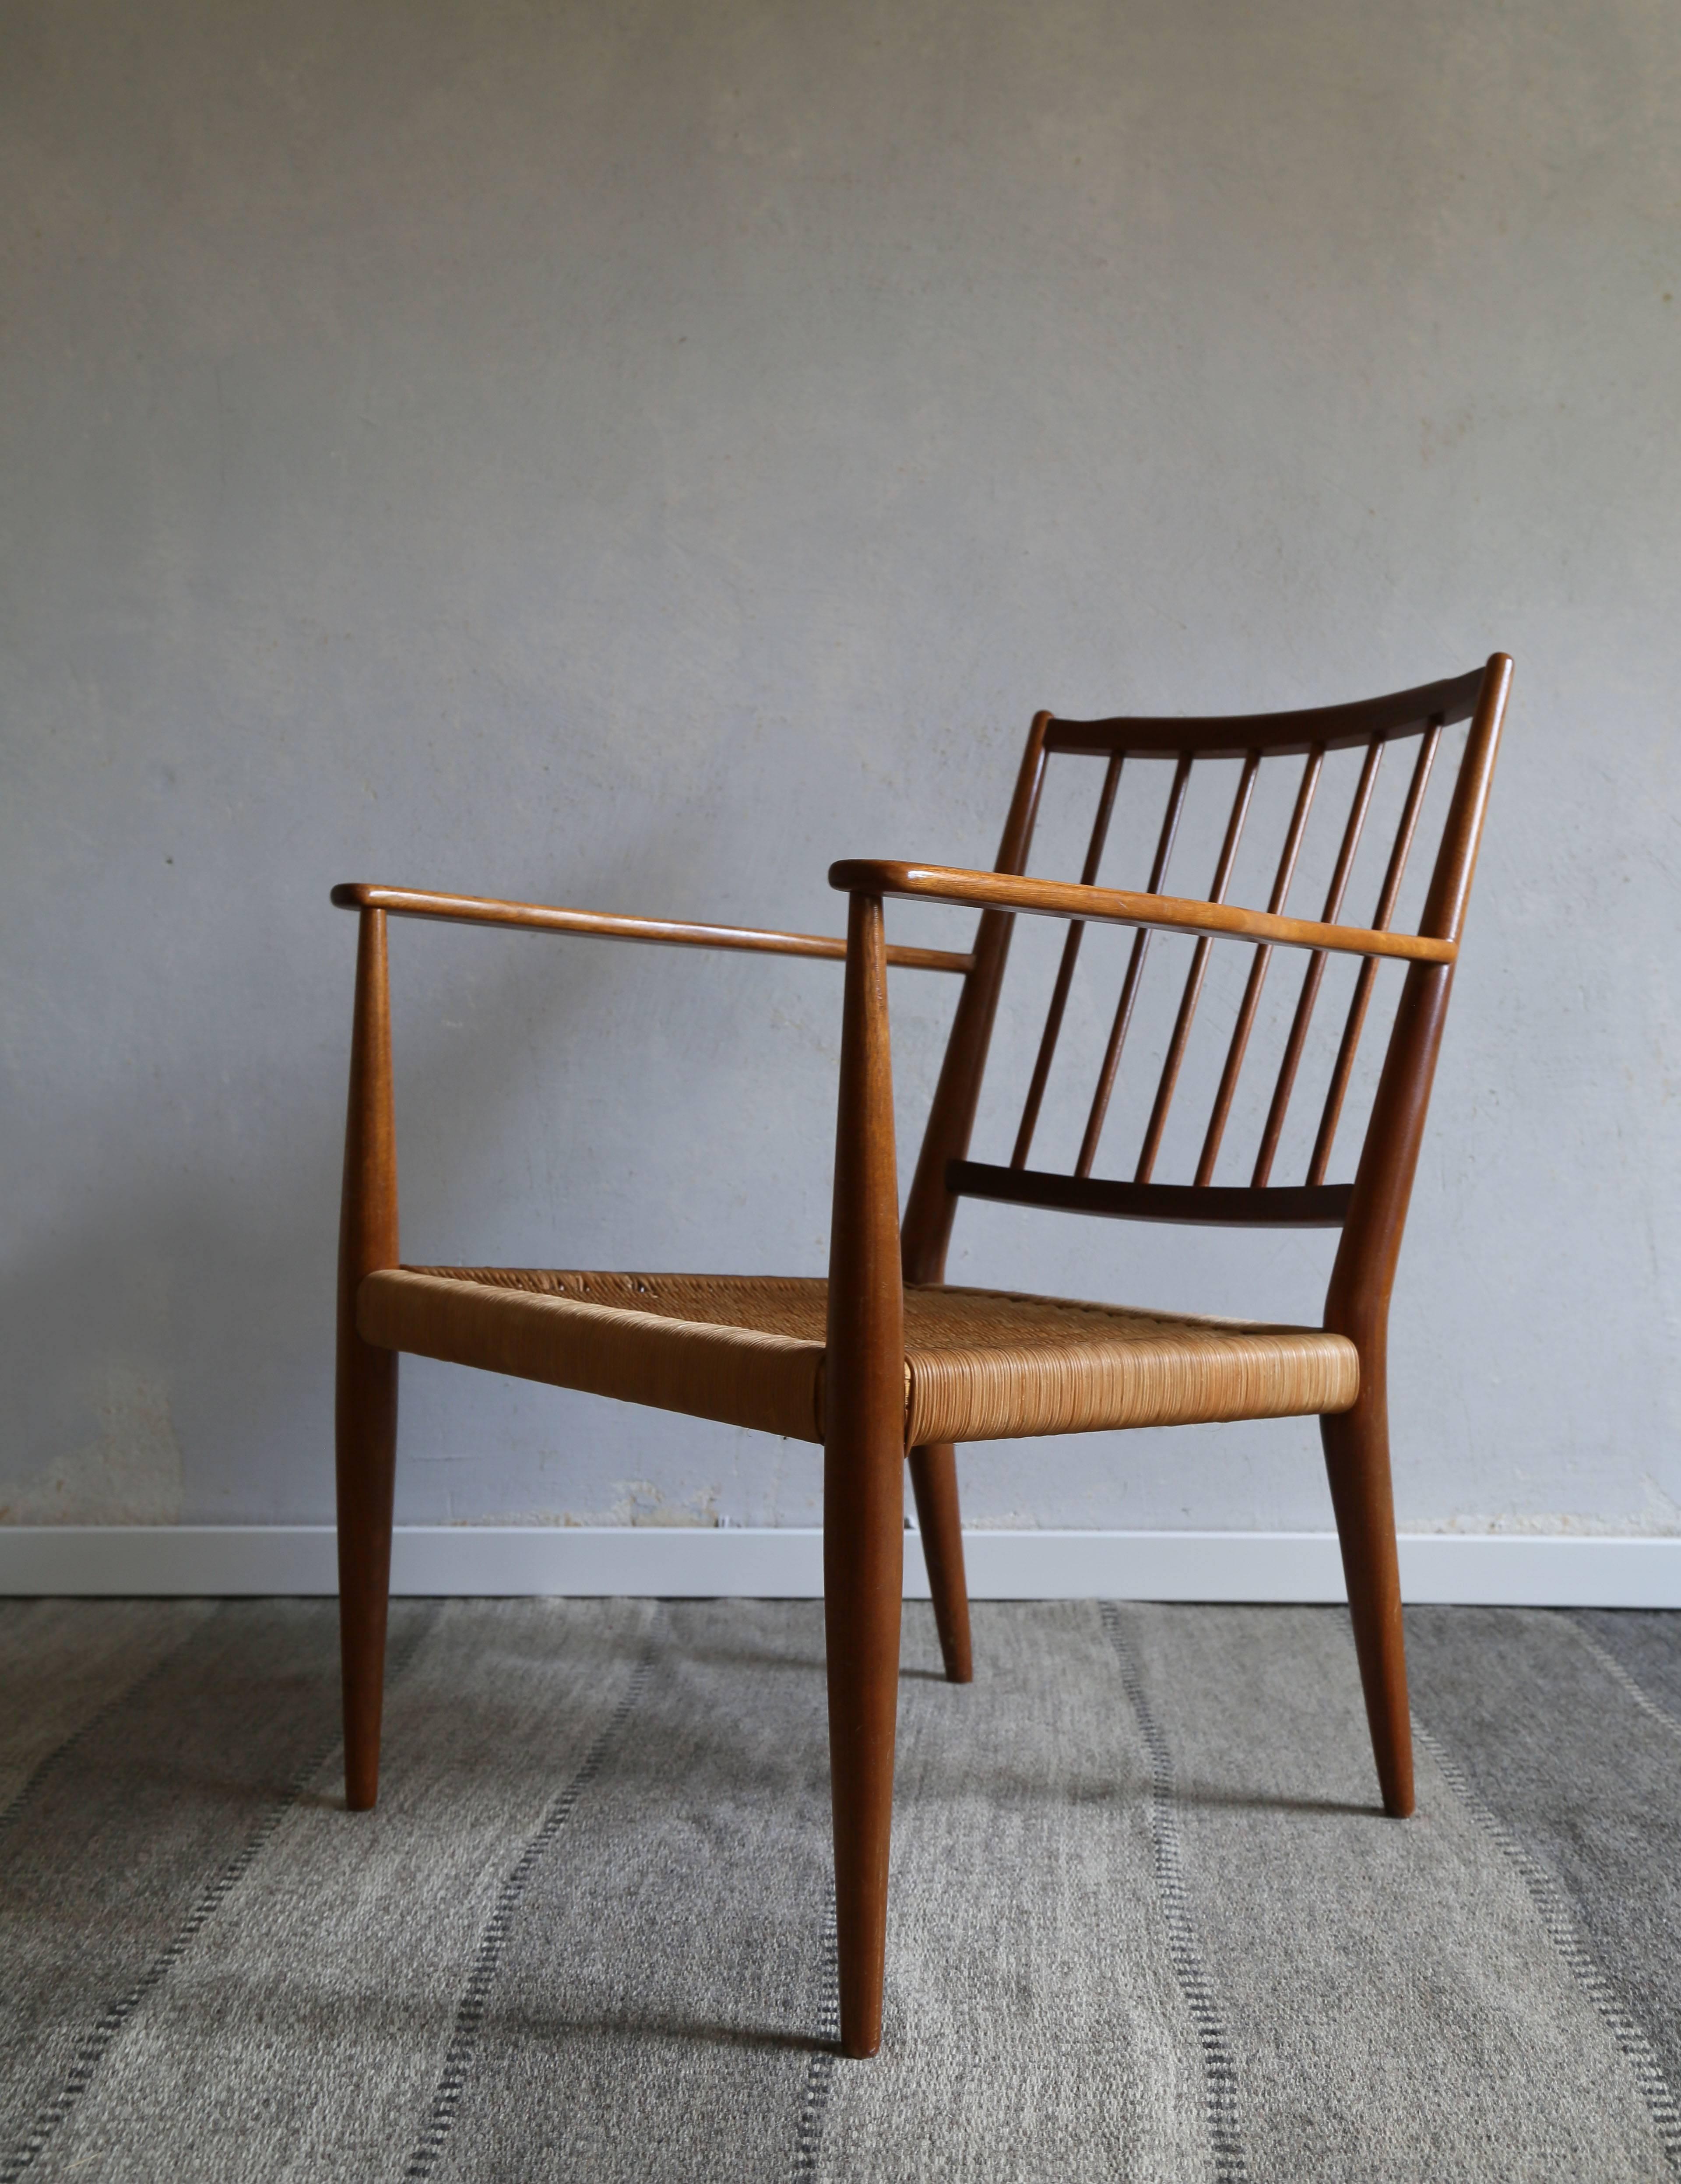 Armchair by Swedish/Austrian designer and architect Josef Frank, Model No.508.

Designed in 1932 and manufactured by Firma Svenskt Tenn, Sweden, circa 1950s.

Unusual model, last production 1960s. Material mahogany and wicker.

Good condition